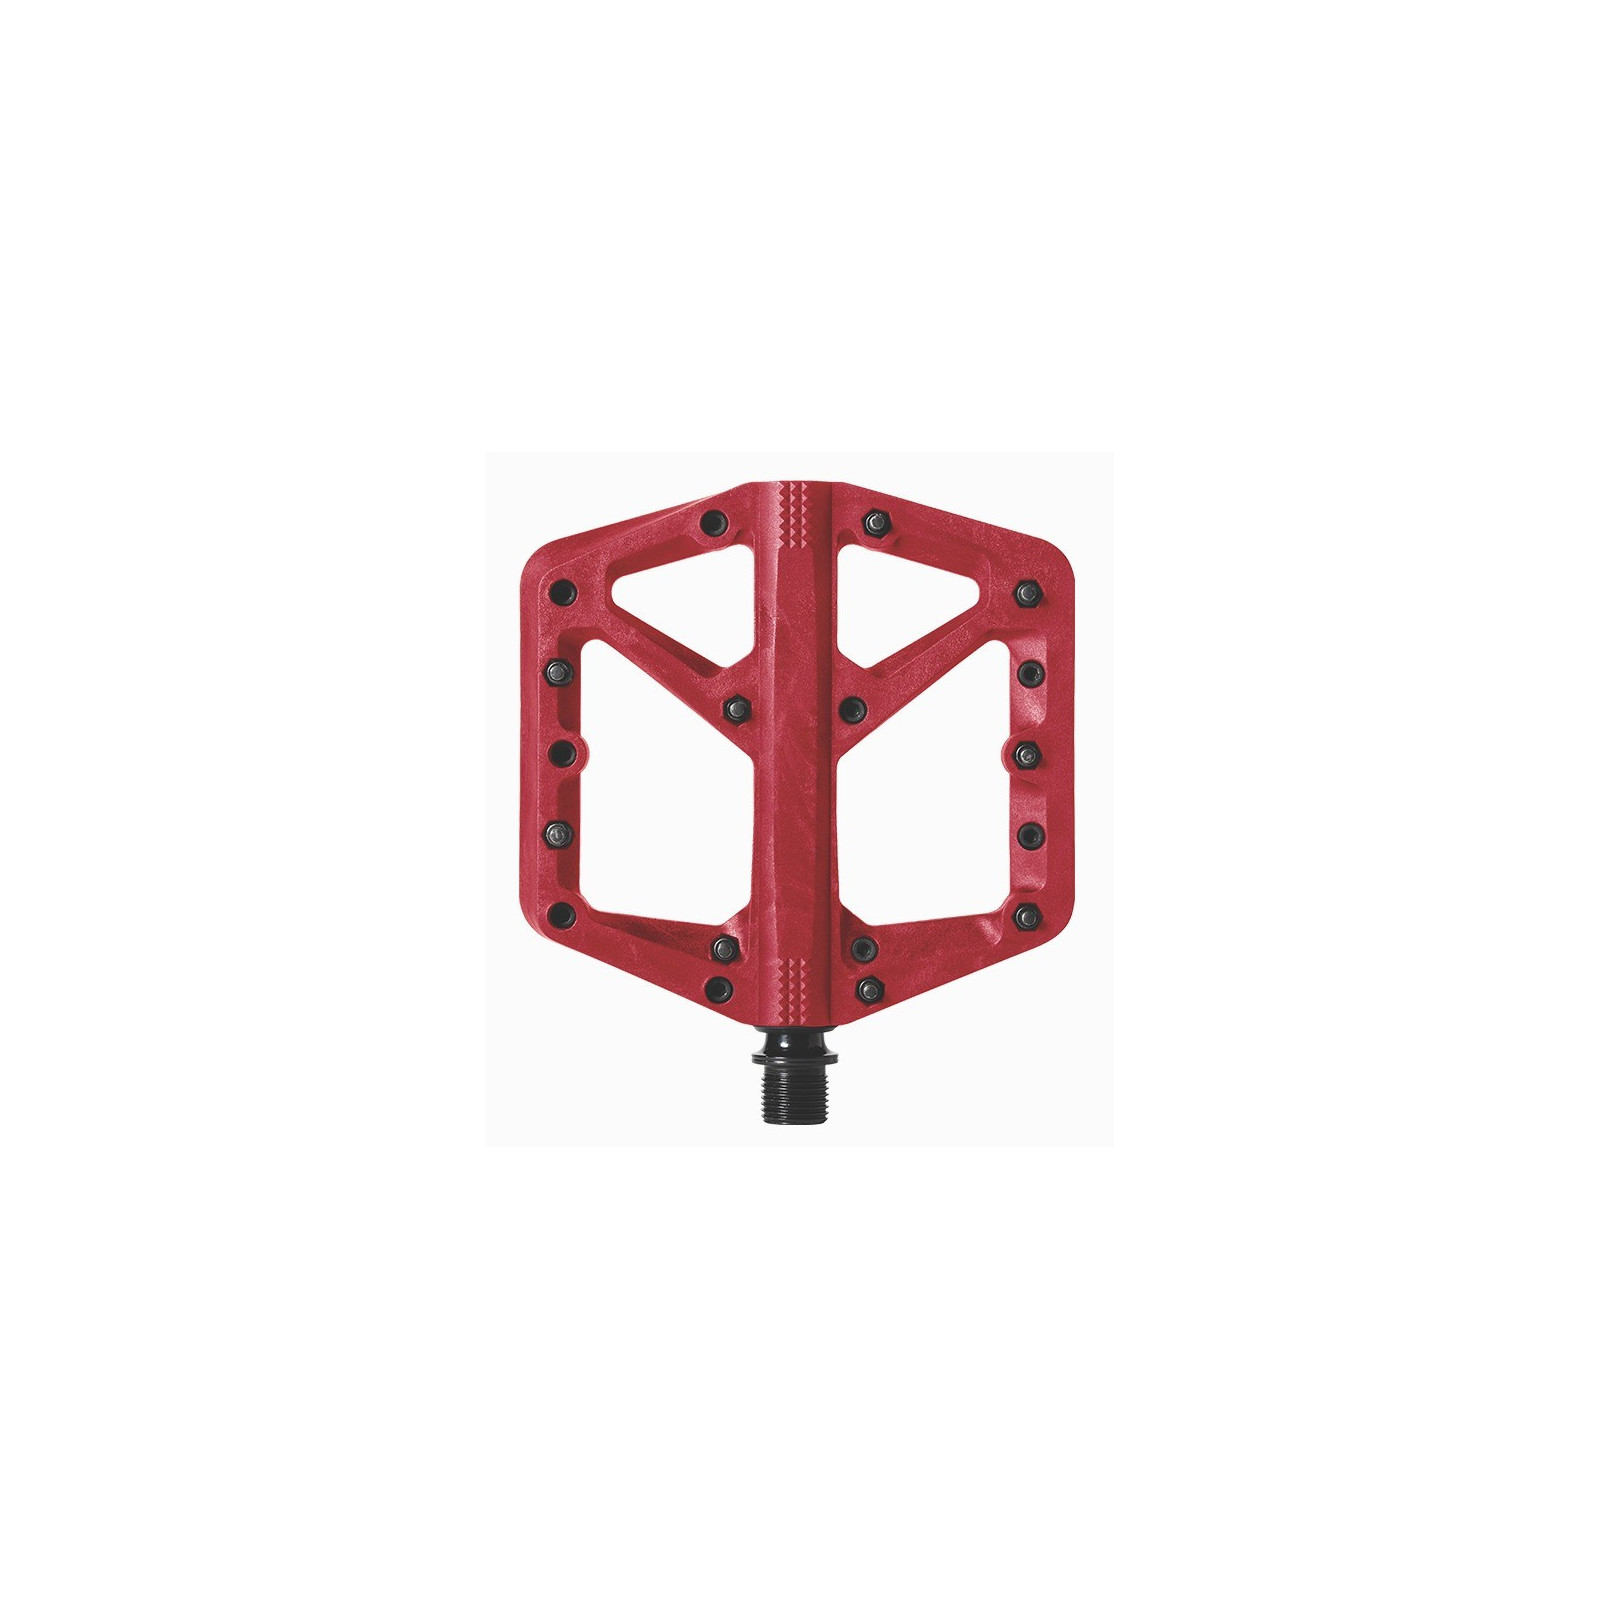 Crankbrothers Stamp 1 Pedals - Small - Red